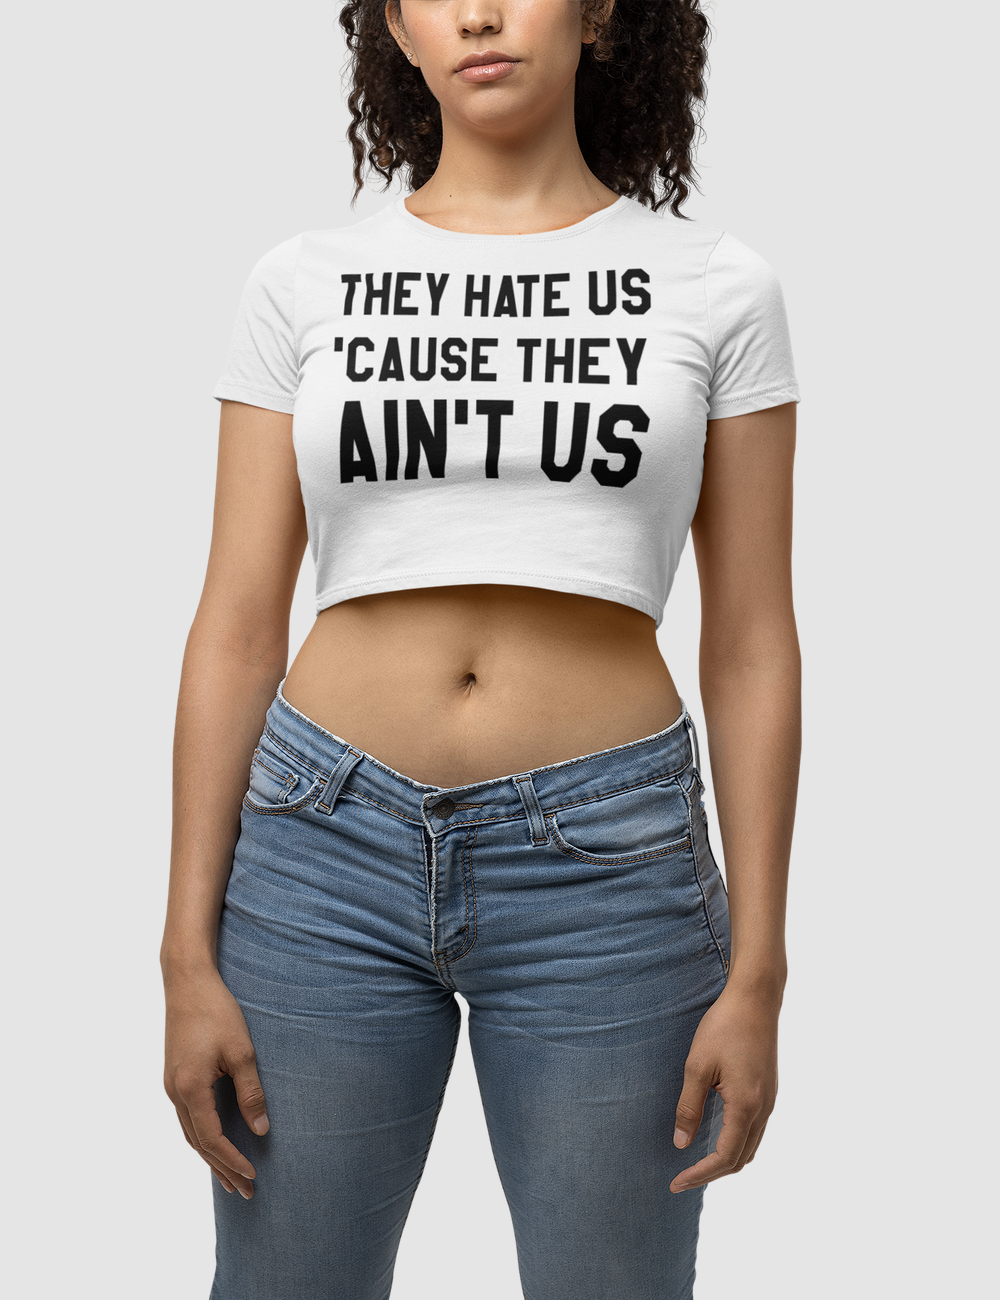 They Hate Us 'Cause They Ain't Us | Women's Crop Top T-Shirt OniTakai